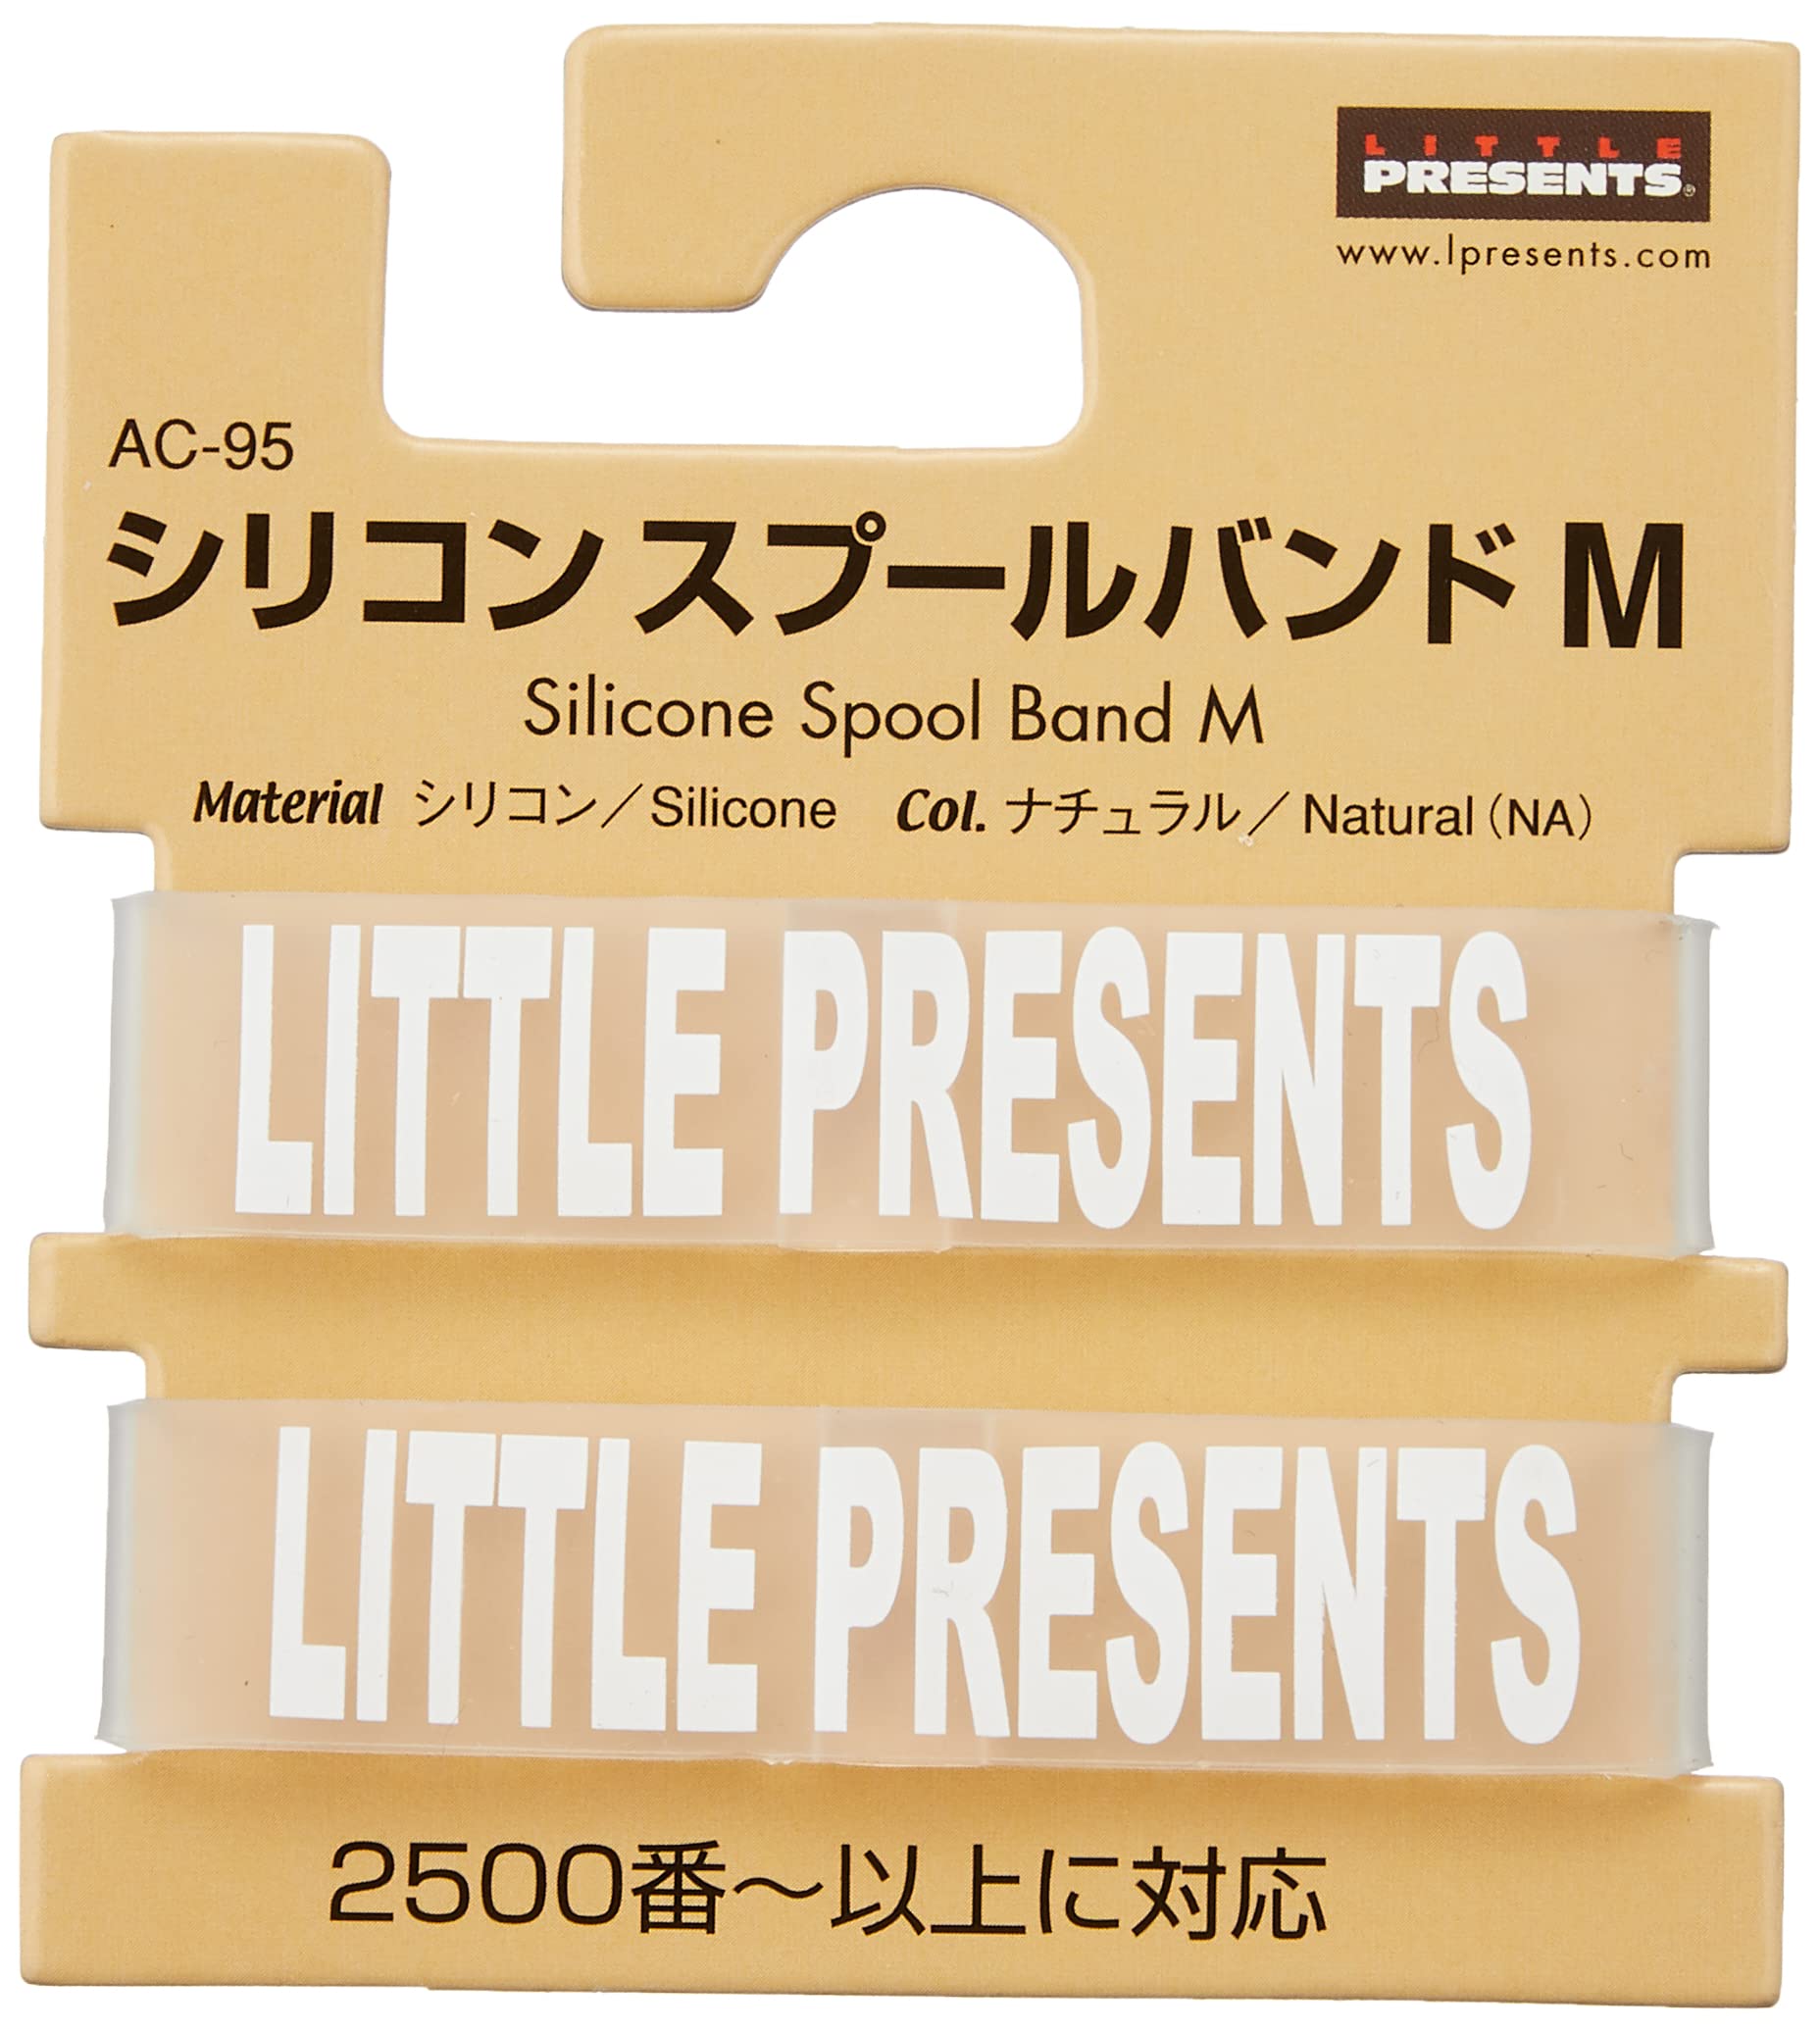  LITTLE PRESENTS (LITTLE PRESENTS) silicon spool band AC-95 M